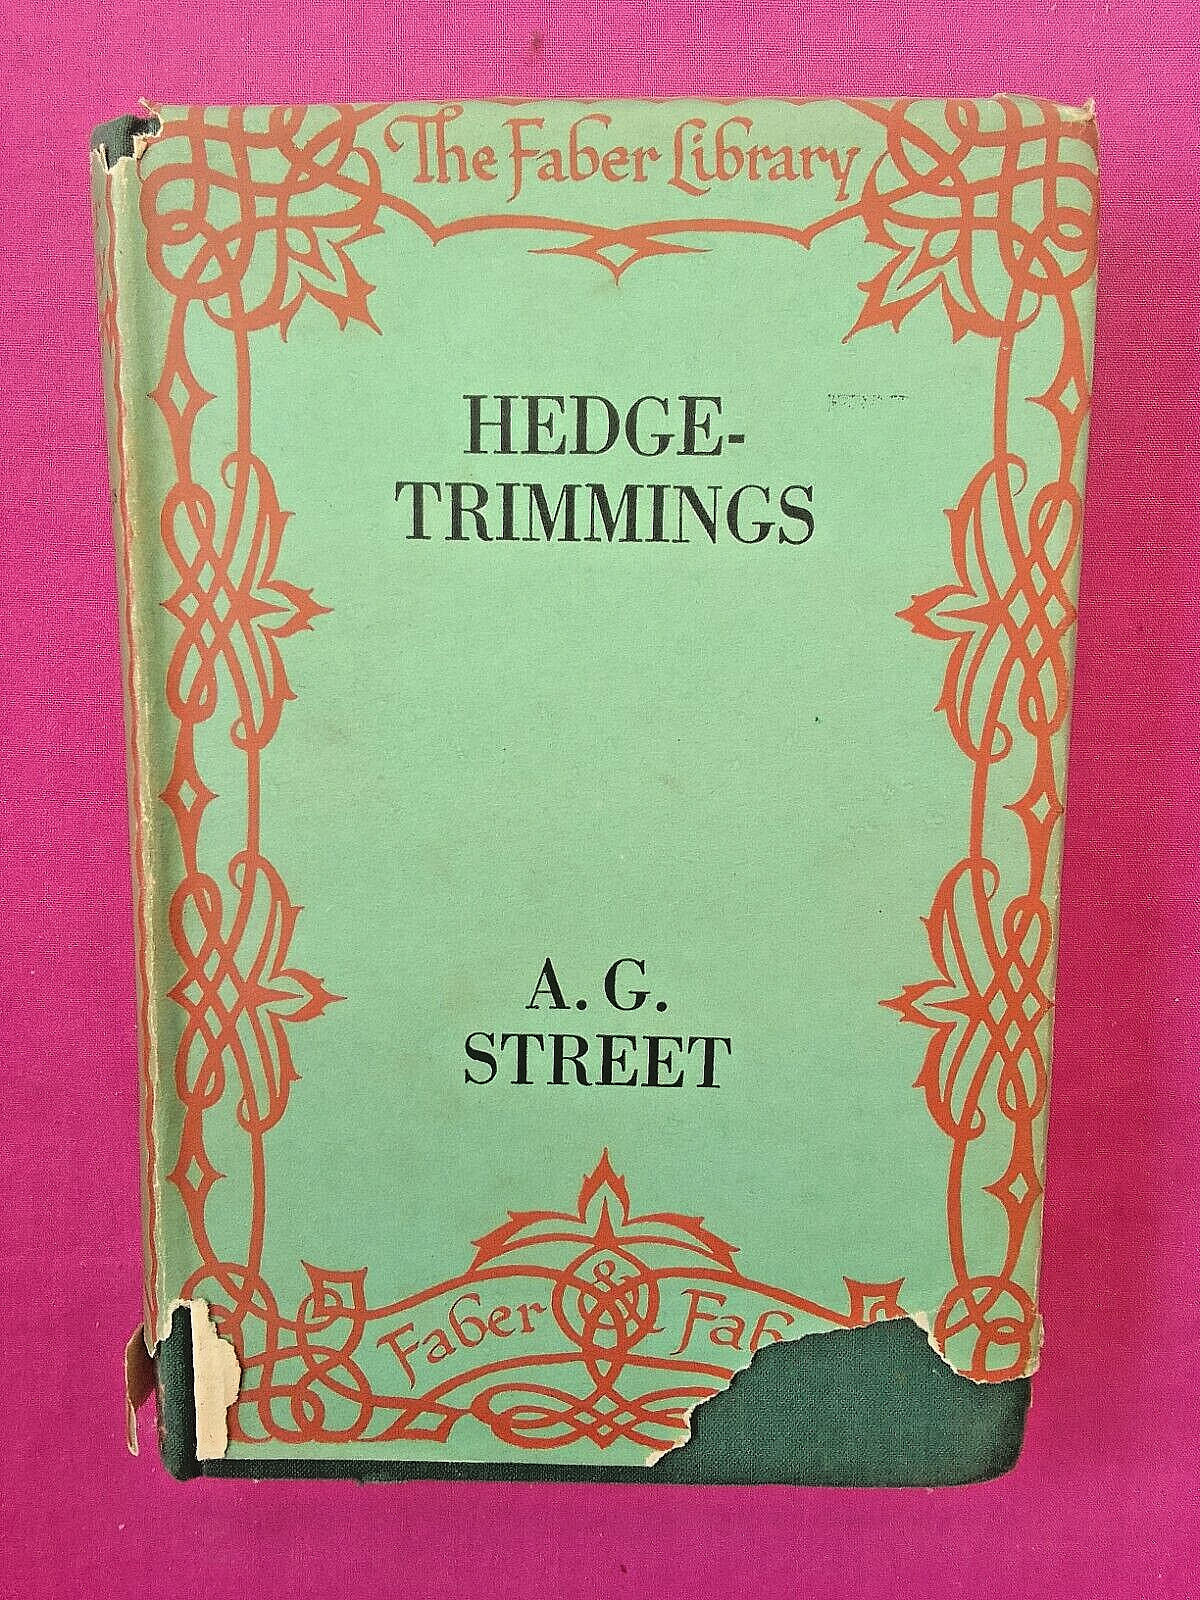 hardback book. Hedge Trimmings by A G STREET.  FREE POST